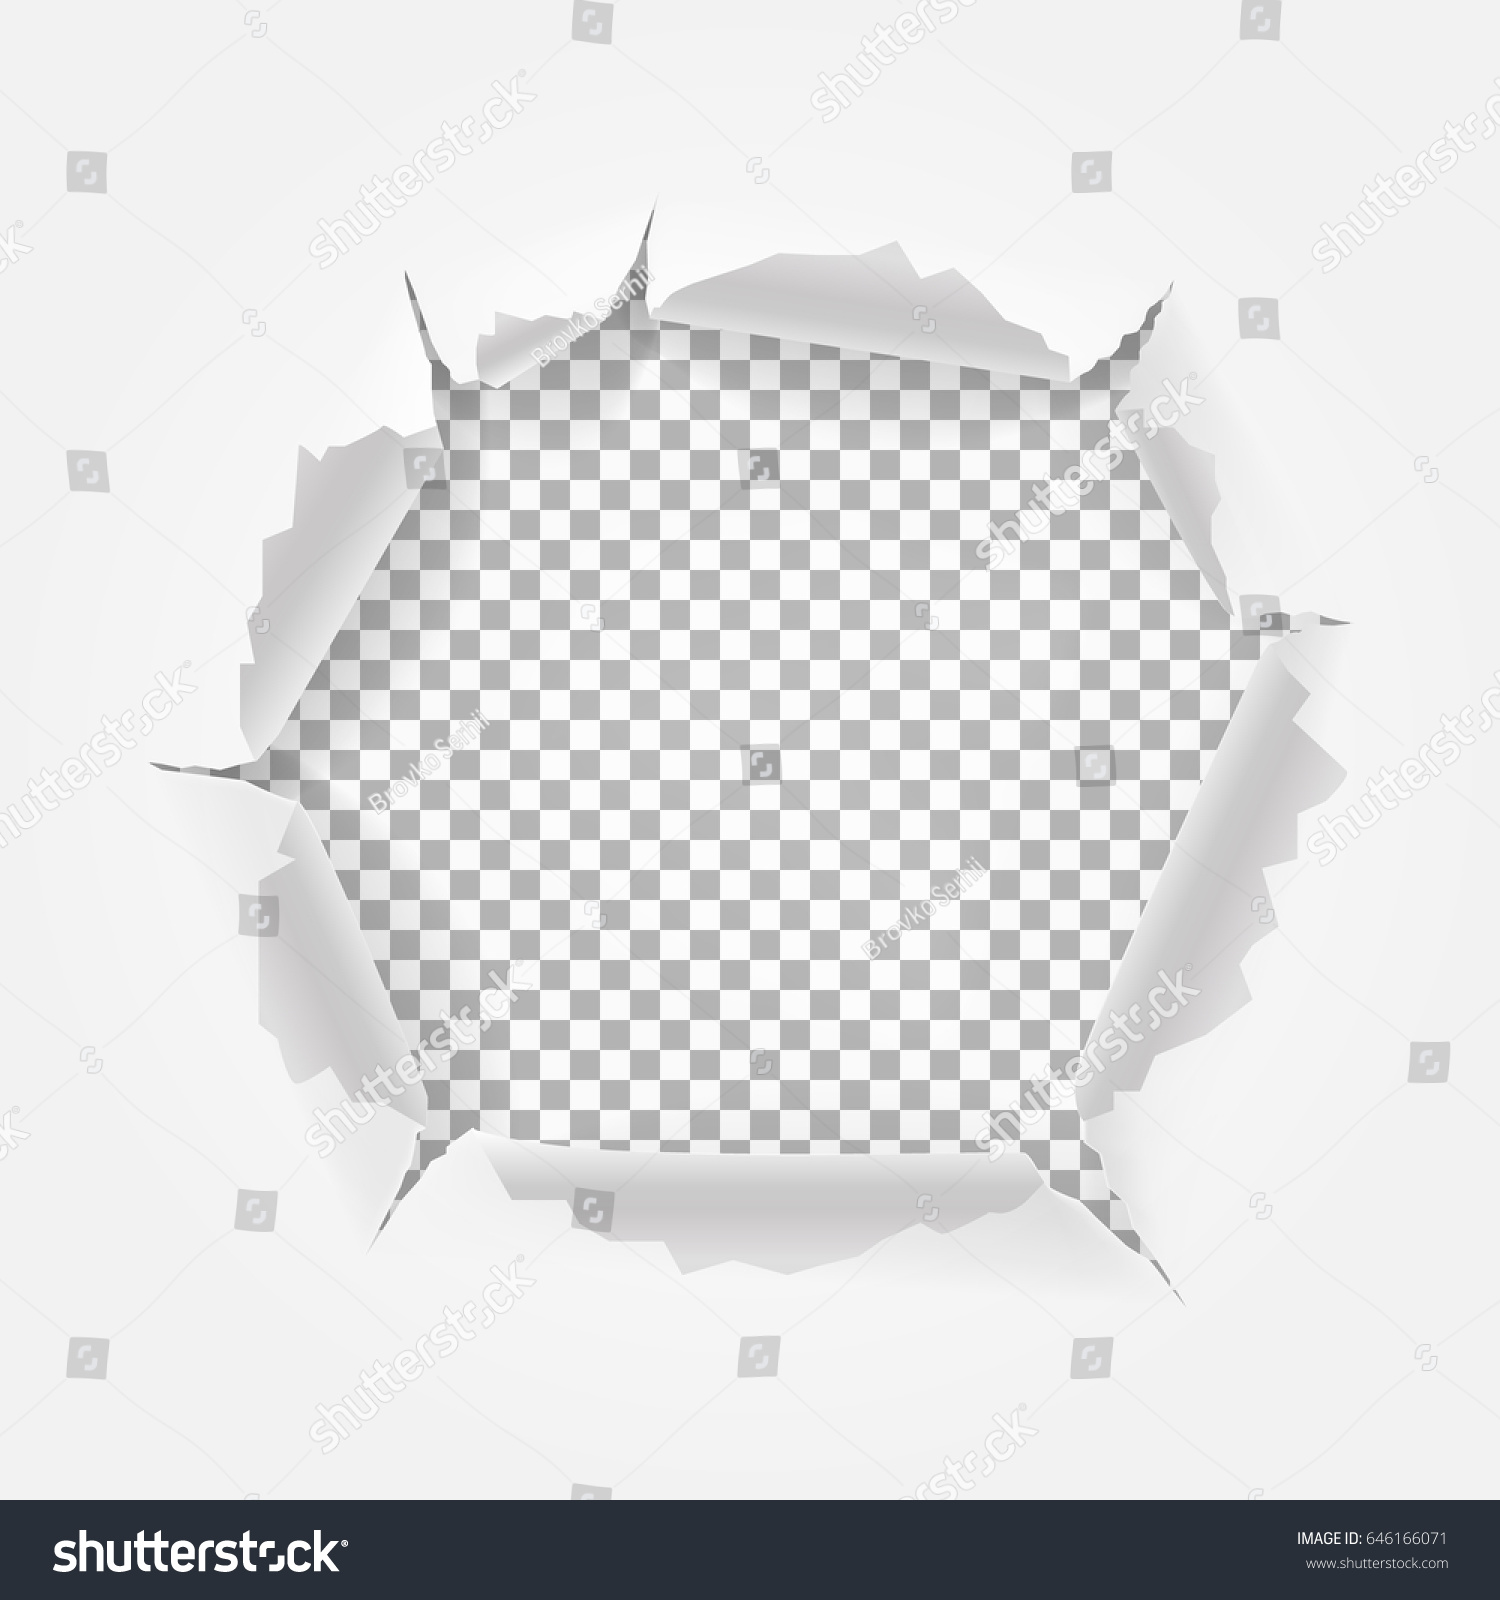 Torn Paper Space Text Torn Hole Stock Vector 646166071 - Shutterstock